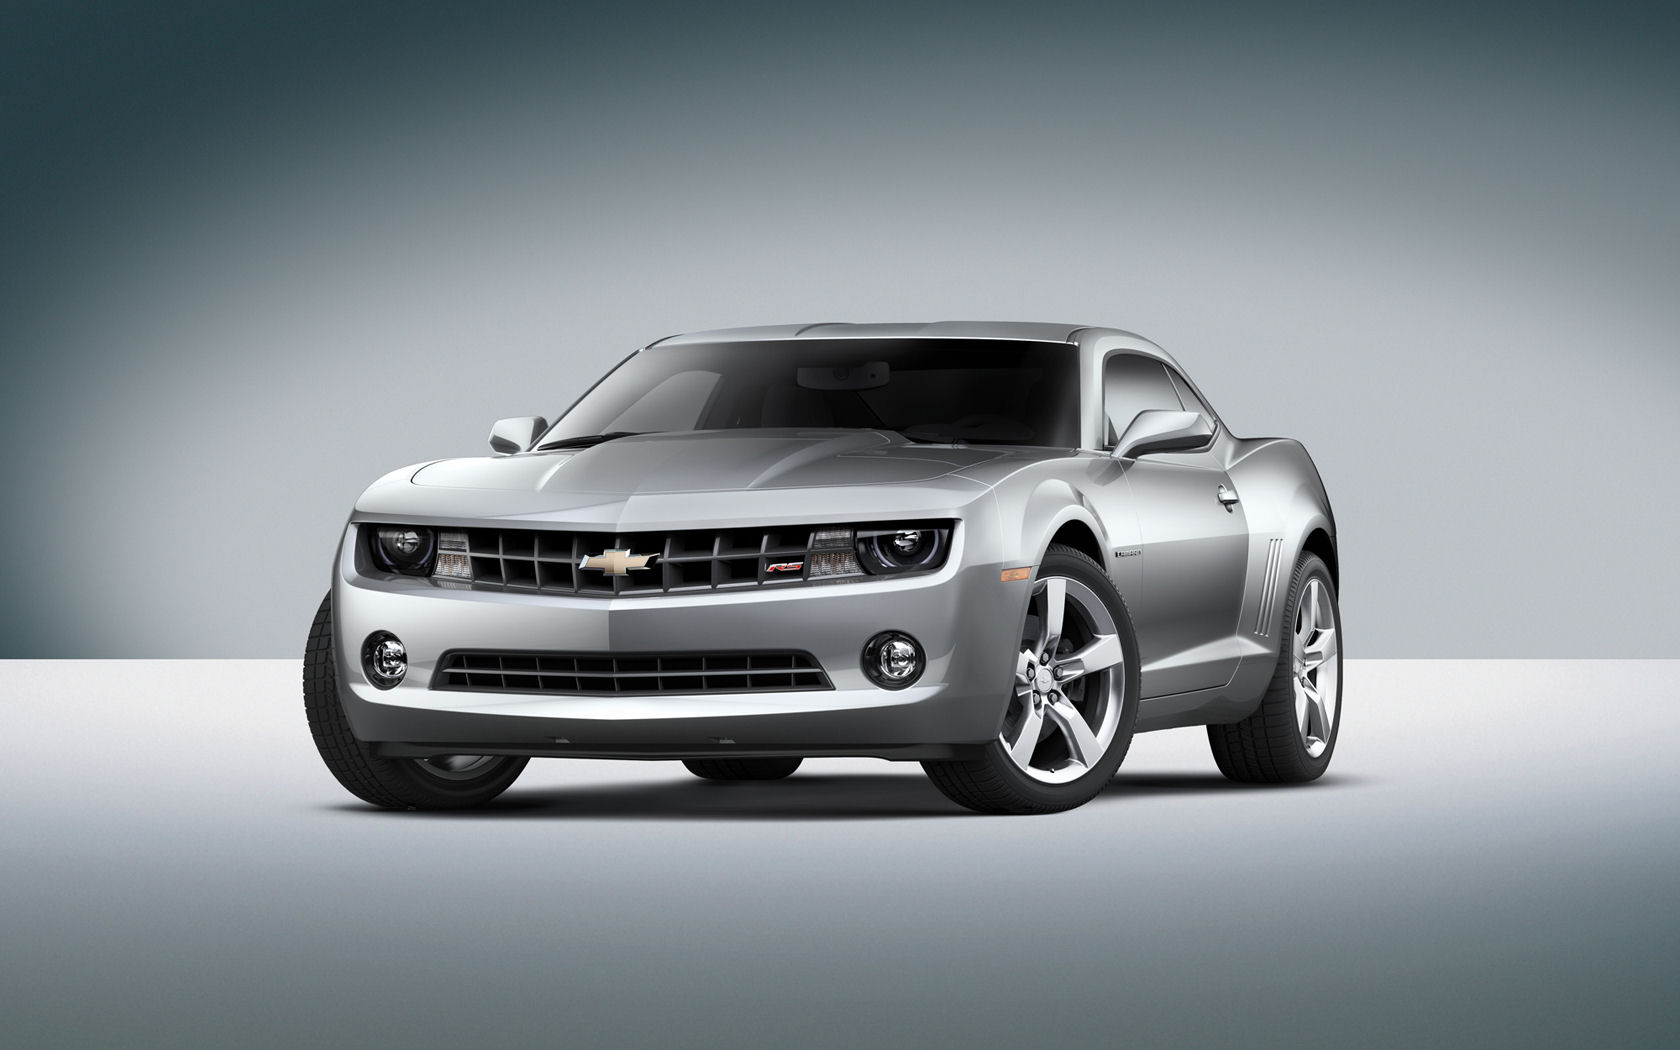 Chevrolet Chevrolet Camaro Chevrolet Camaro Desktop Wallpapers 1680x1050